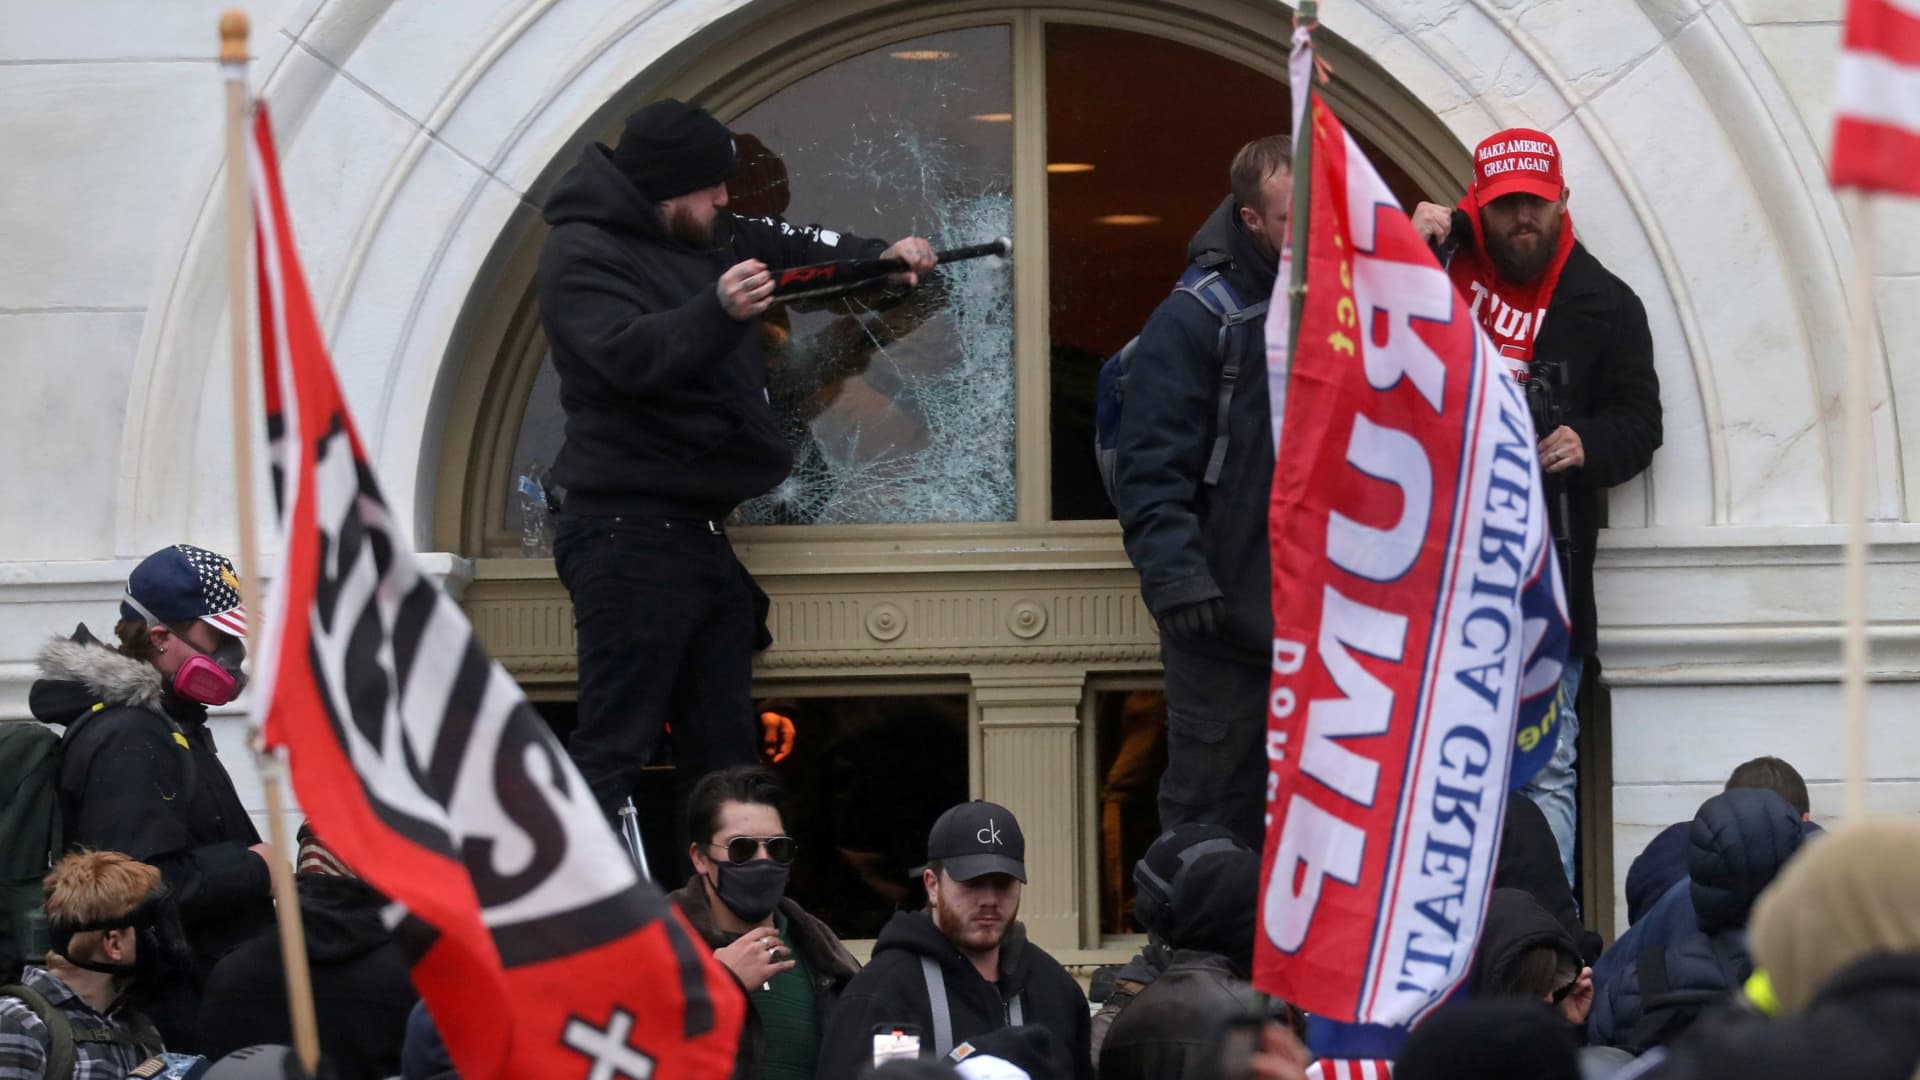 A man breaks a window as a mob of supporters of U.S. President Donald Trump storm the U.S. Capitol Building in Washington, U.S., January 6, 2021.